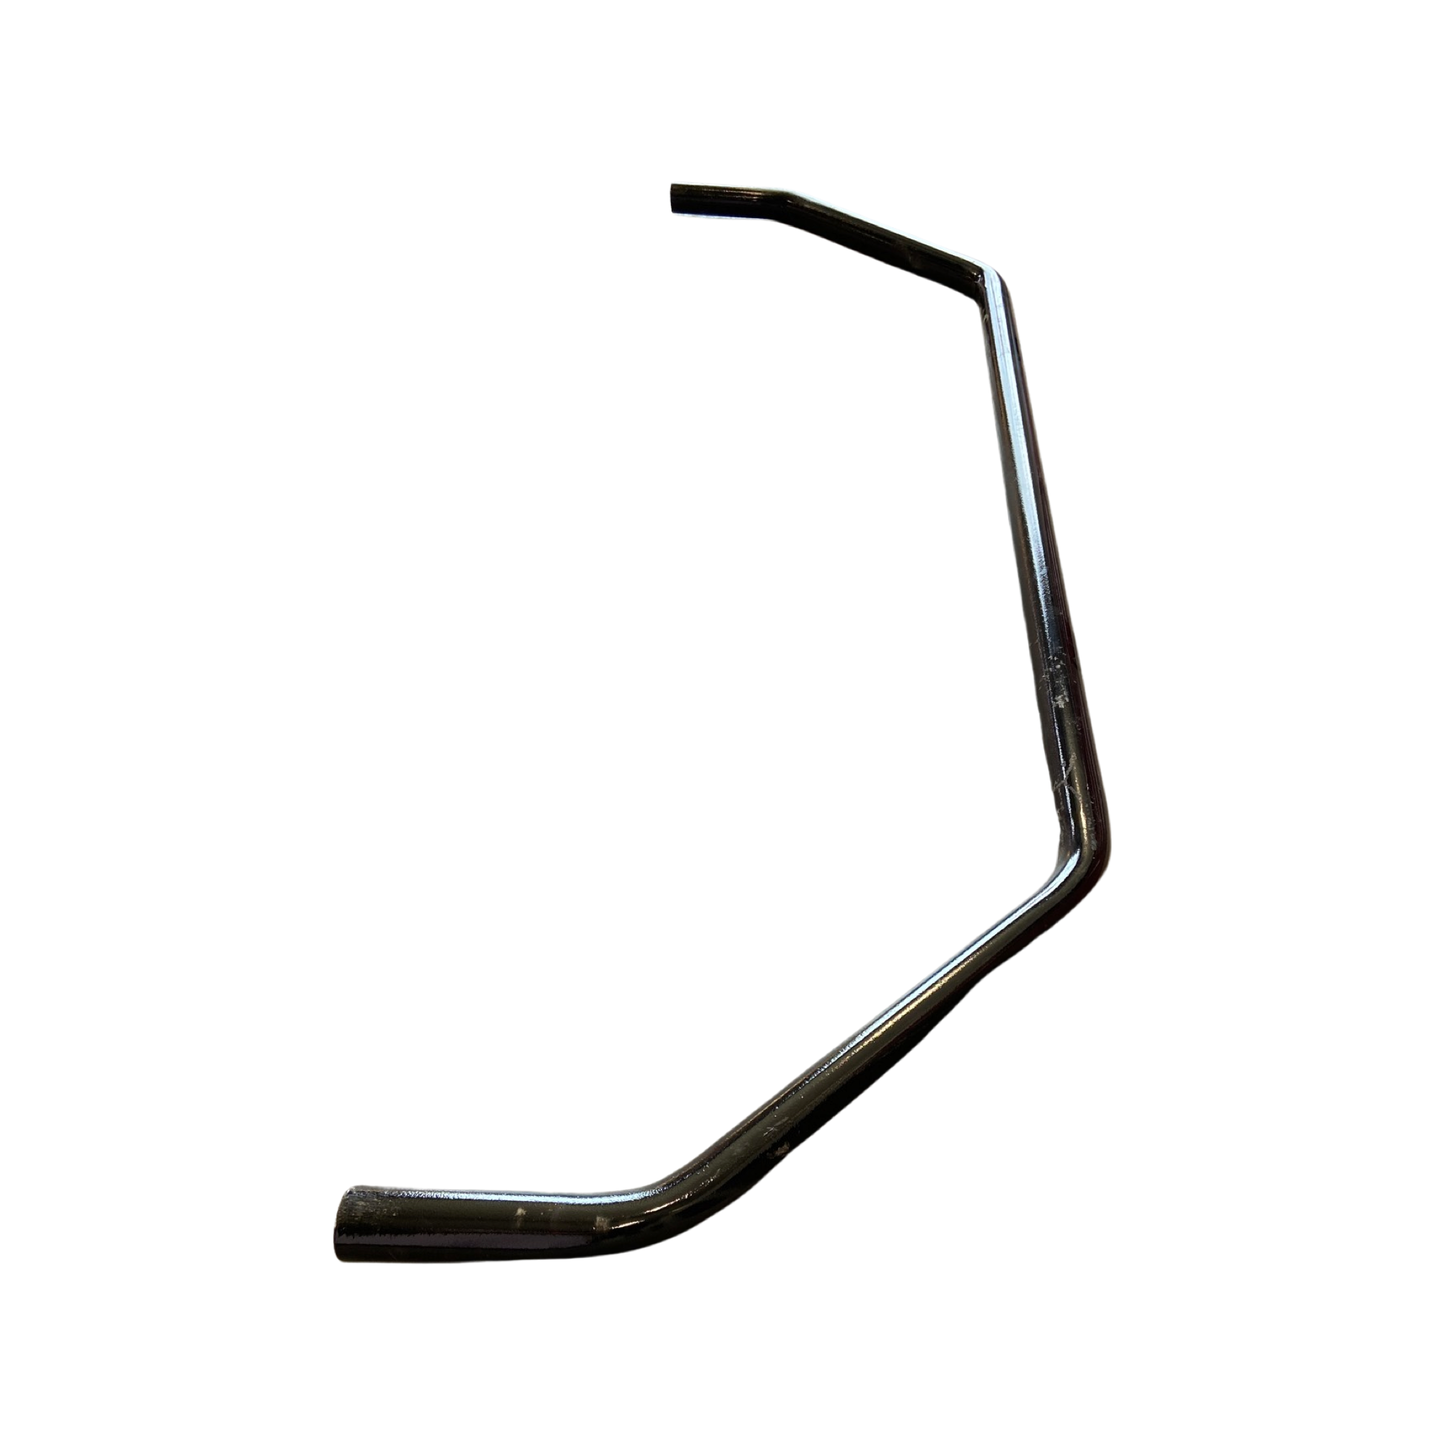 Fender, Pipe Fender Guard For Tandem Axle